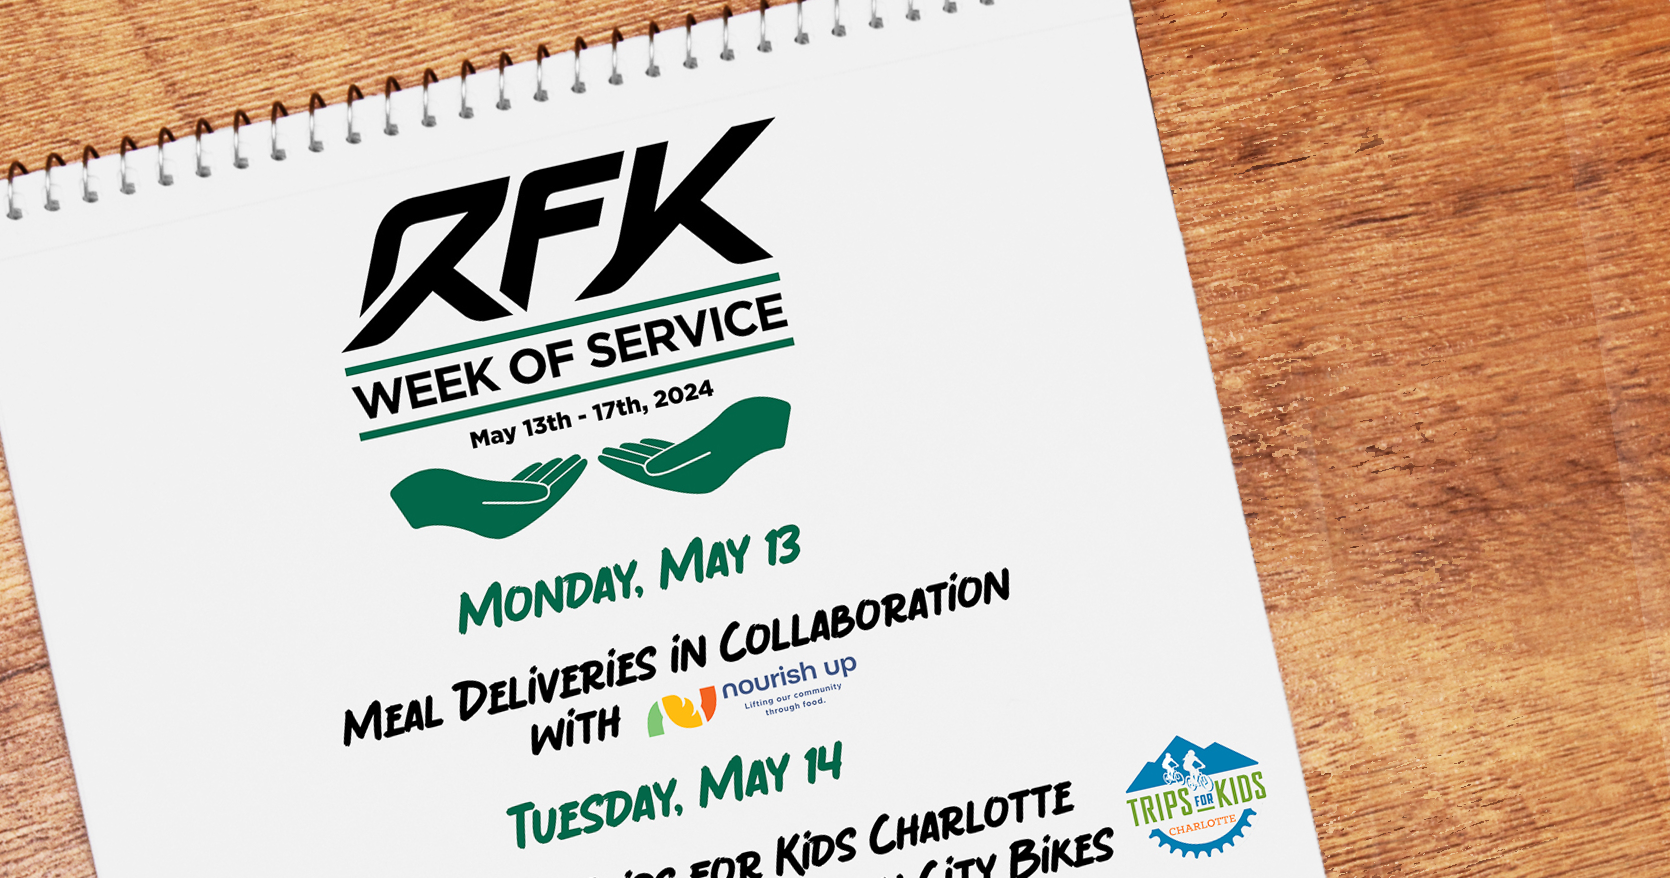 RFK Announces Second Annual Week of Service